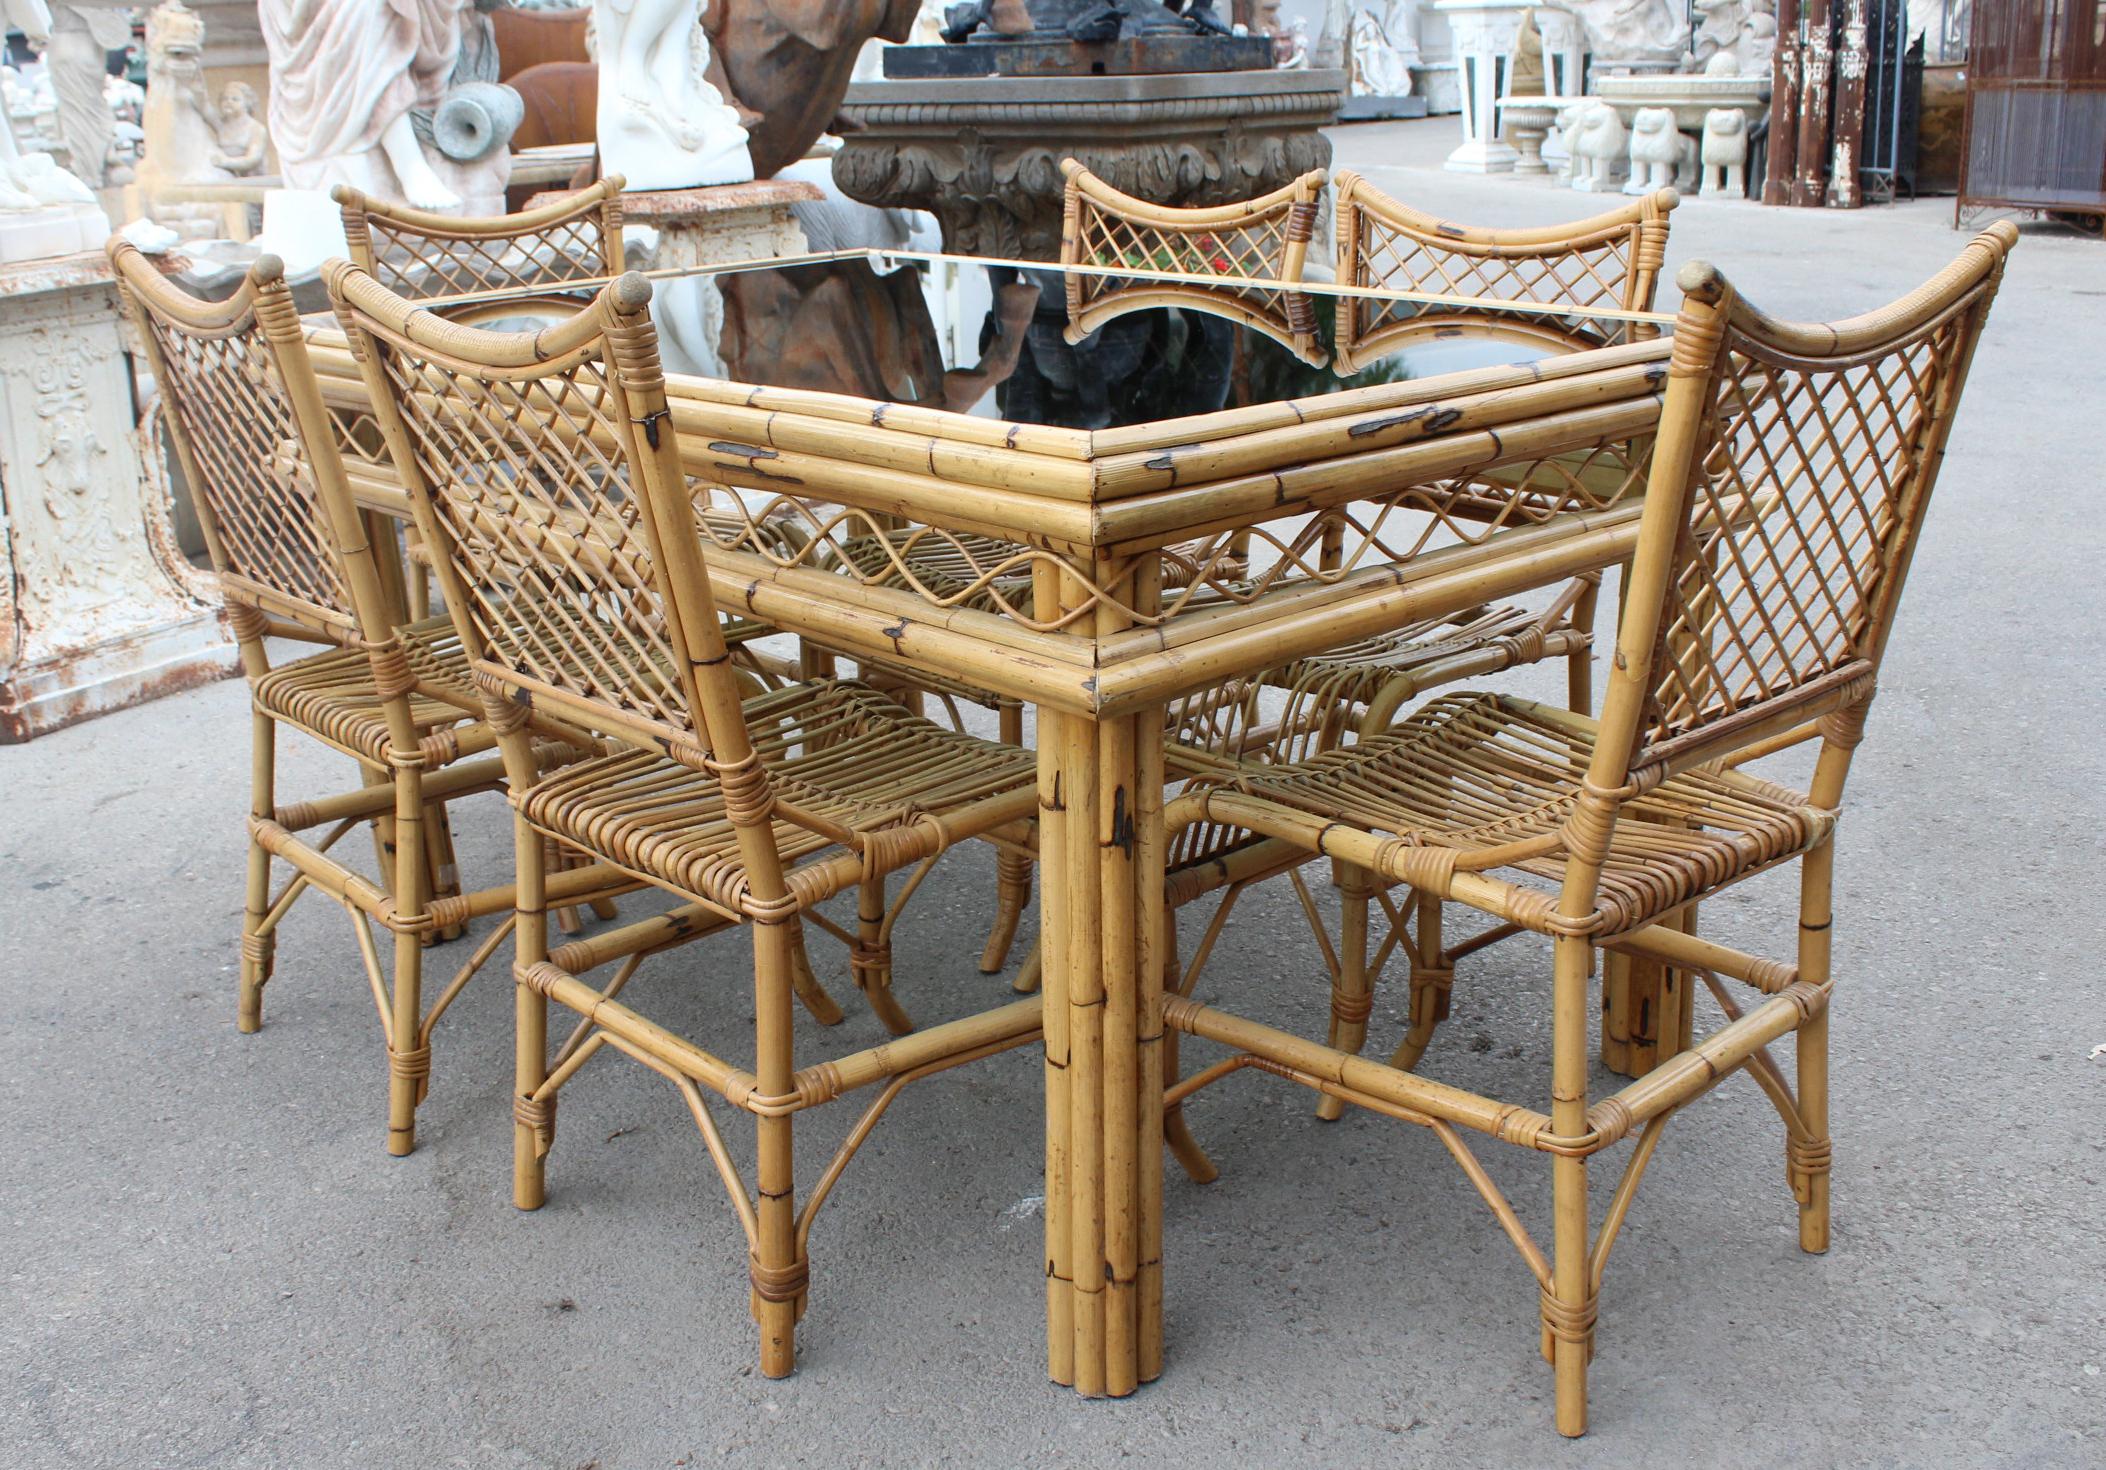 1970s Spanish bamboo and rattan 6-seat dining set with smoked glass top.

Table size: 82 x 144 x 97
Chair size: 95 x 44 x 55.